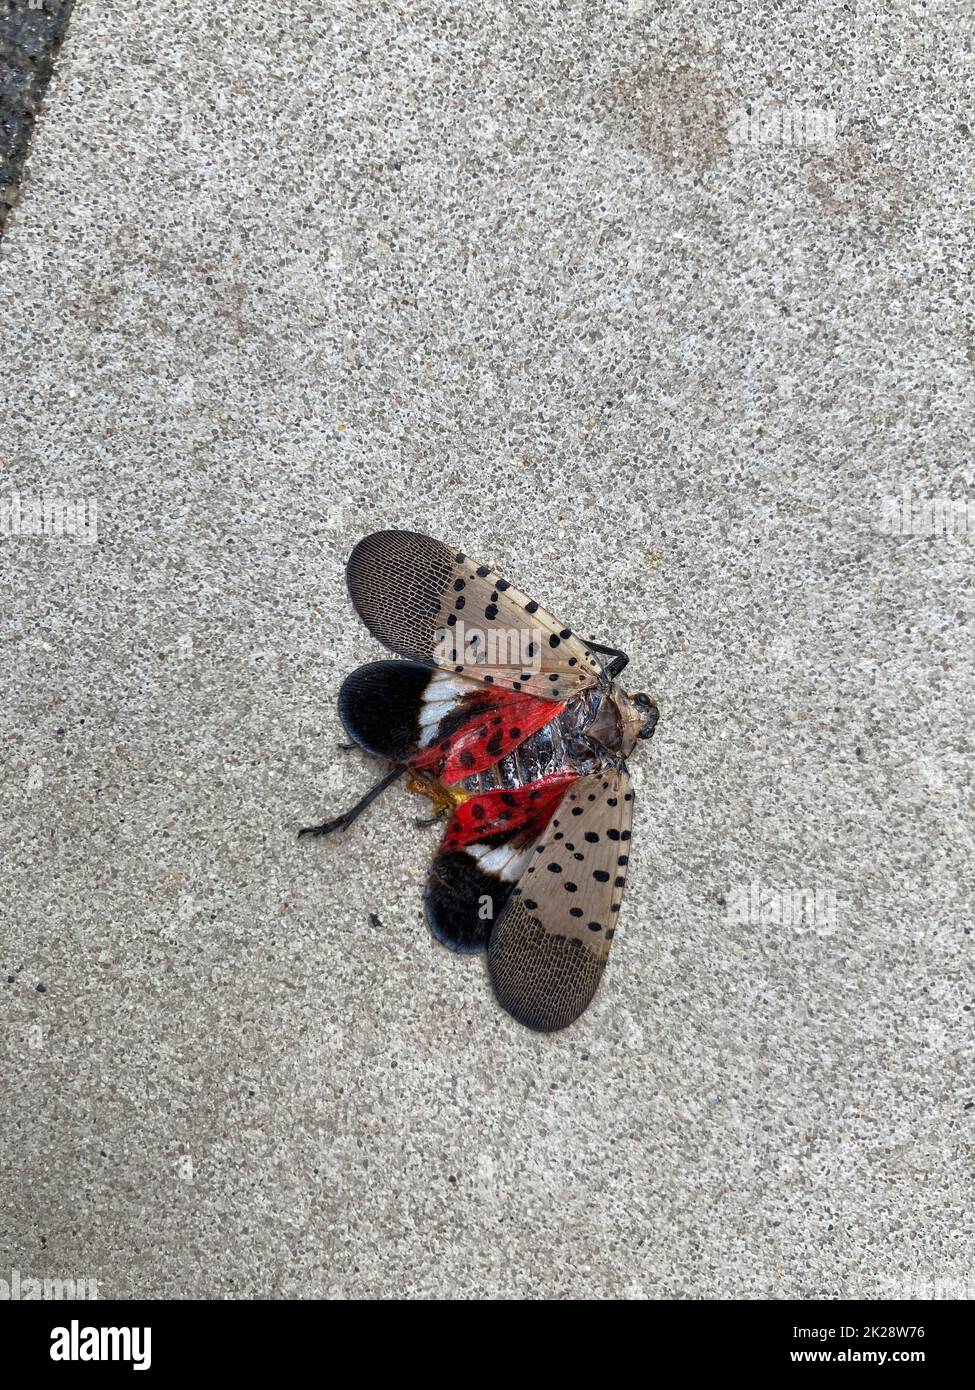 A squashed Spotted Lanternfly  in the Hudson Yards neighborhood in New York on Tuesday, September 13, 2022. (© Frances M. Roberts) Stock Photo